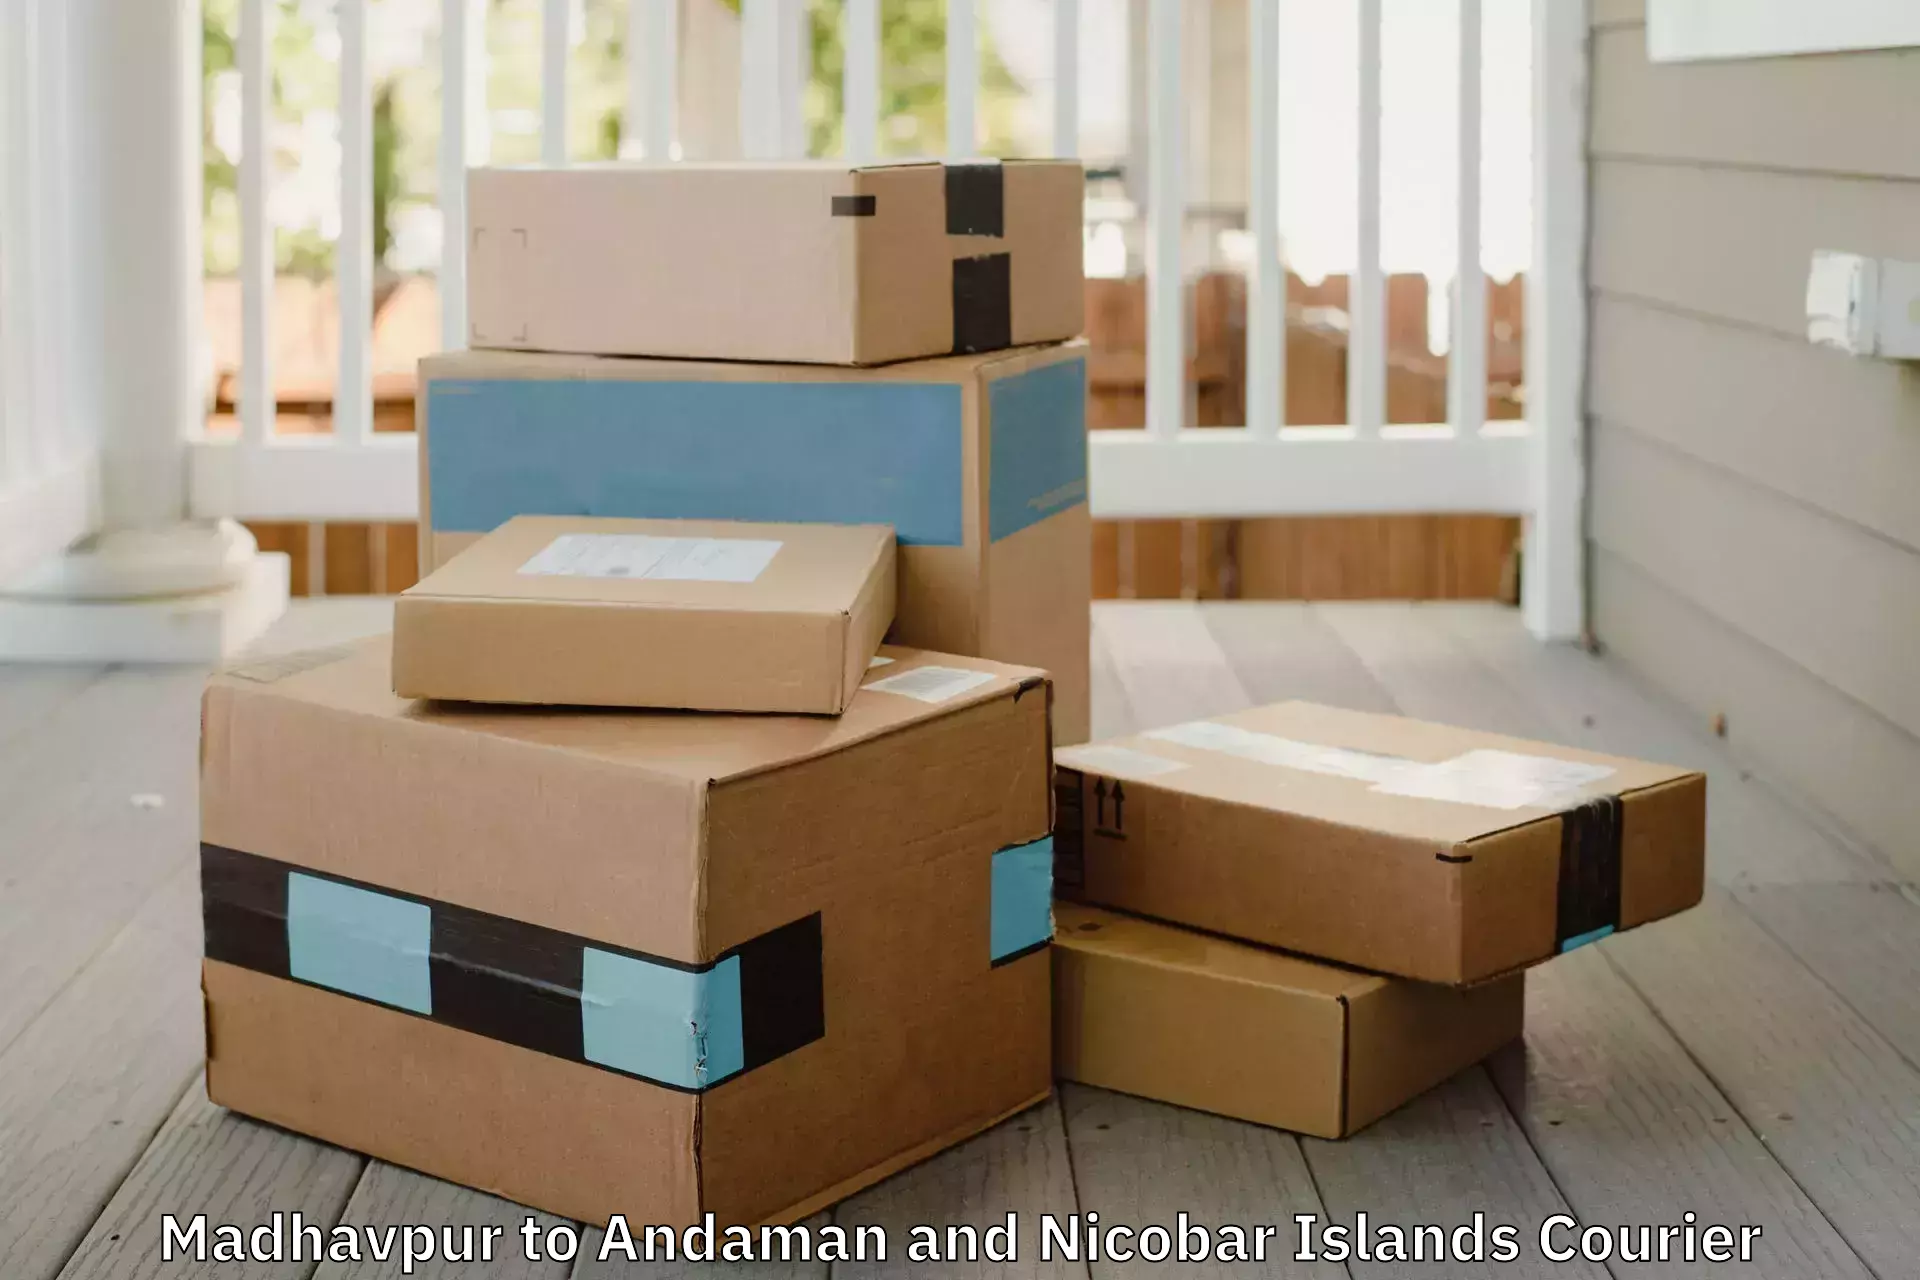 Comprehensive relocation services in Madhavpur to Andaman and Nicobar Islands